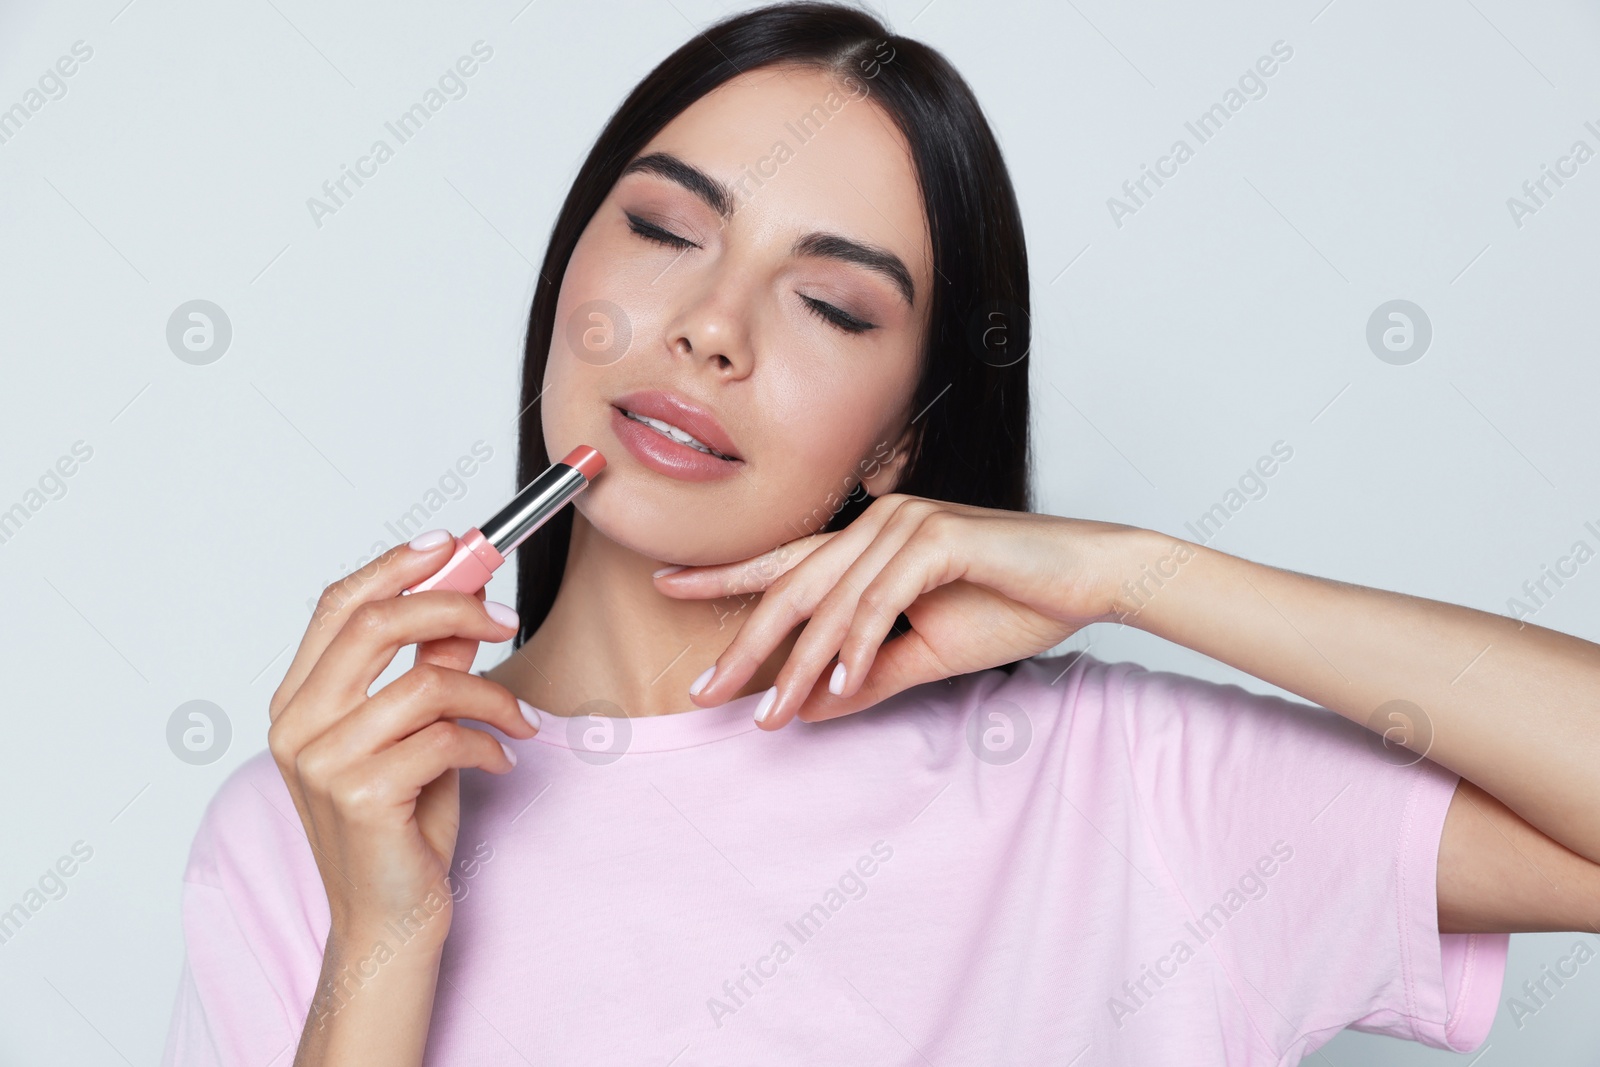 Photo of Young woman with beautiful makeup holding nude lipstick on light gray background